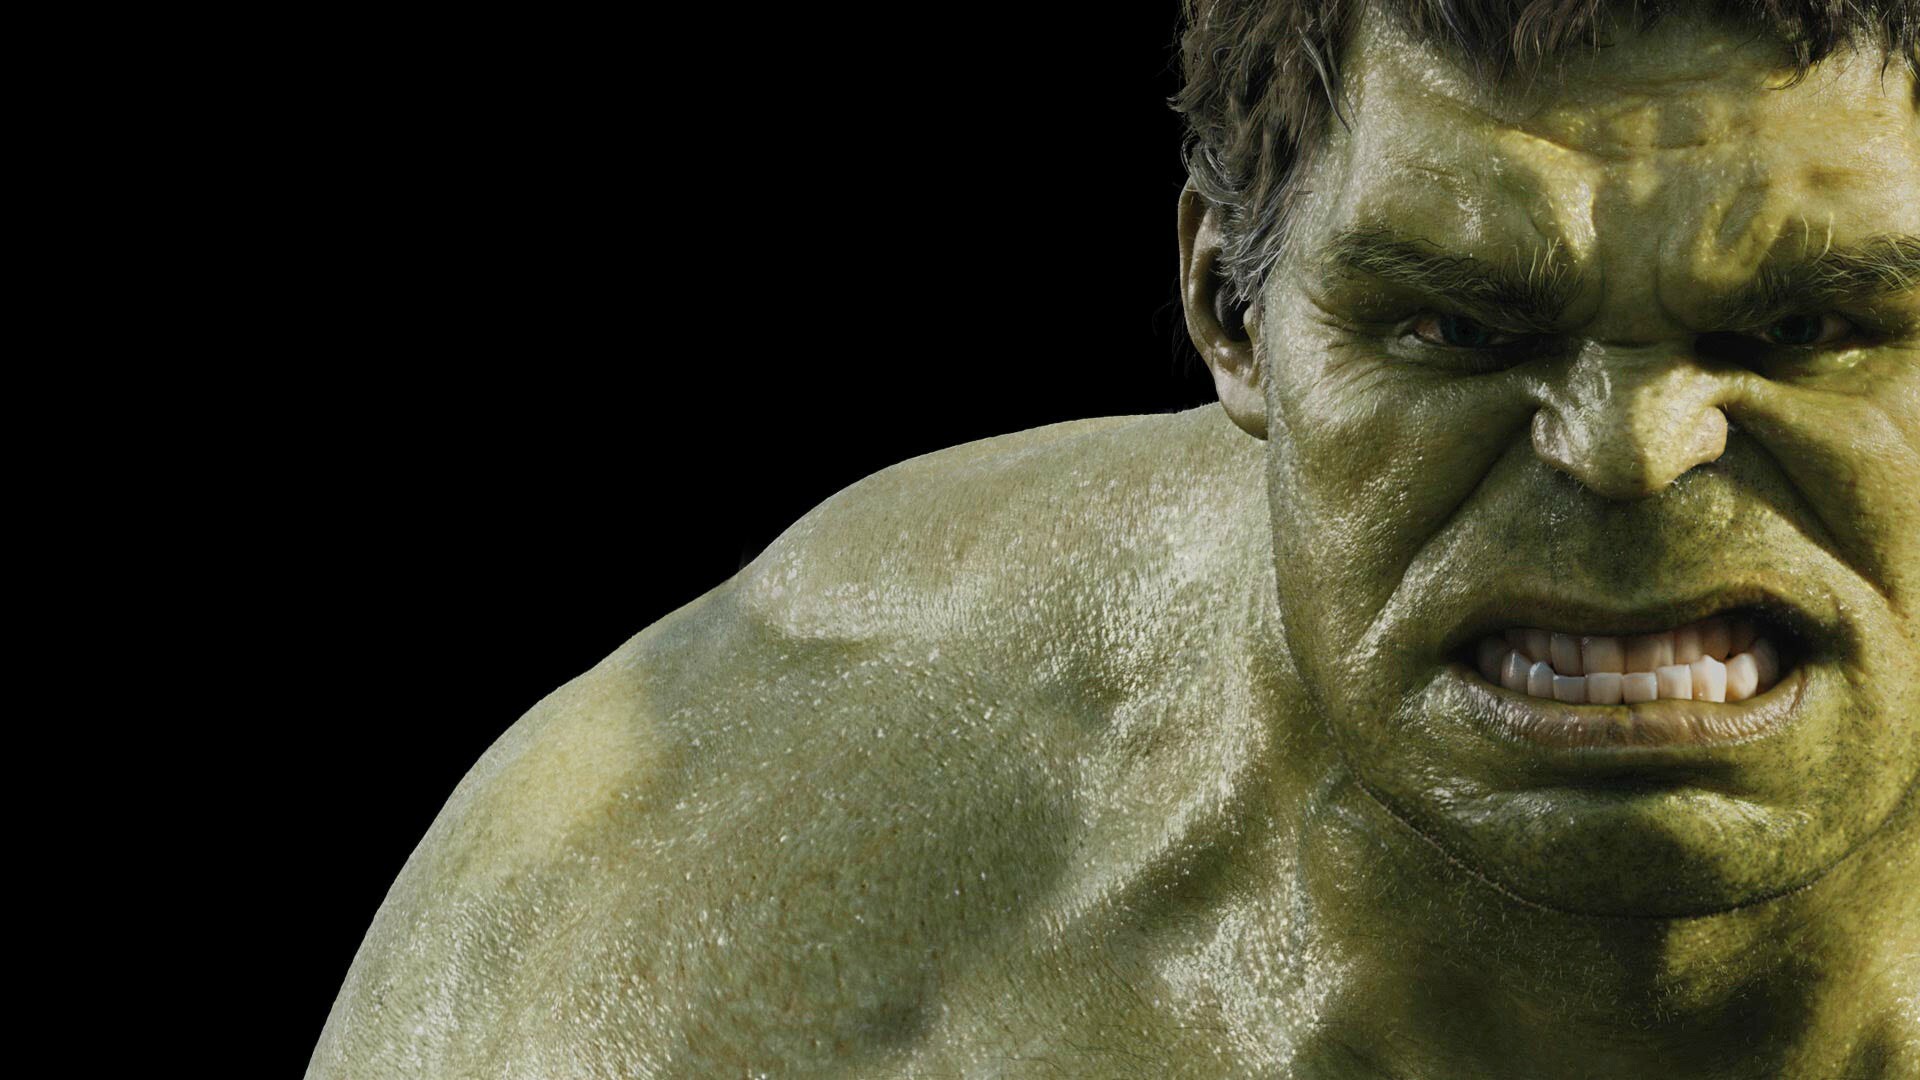 Hulk: Ranked as 4th in "The Top 50 Avengers". 1920x1080 Full HD Background.